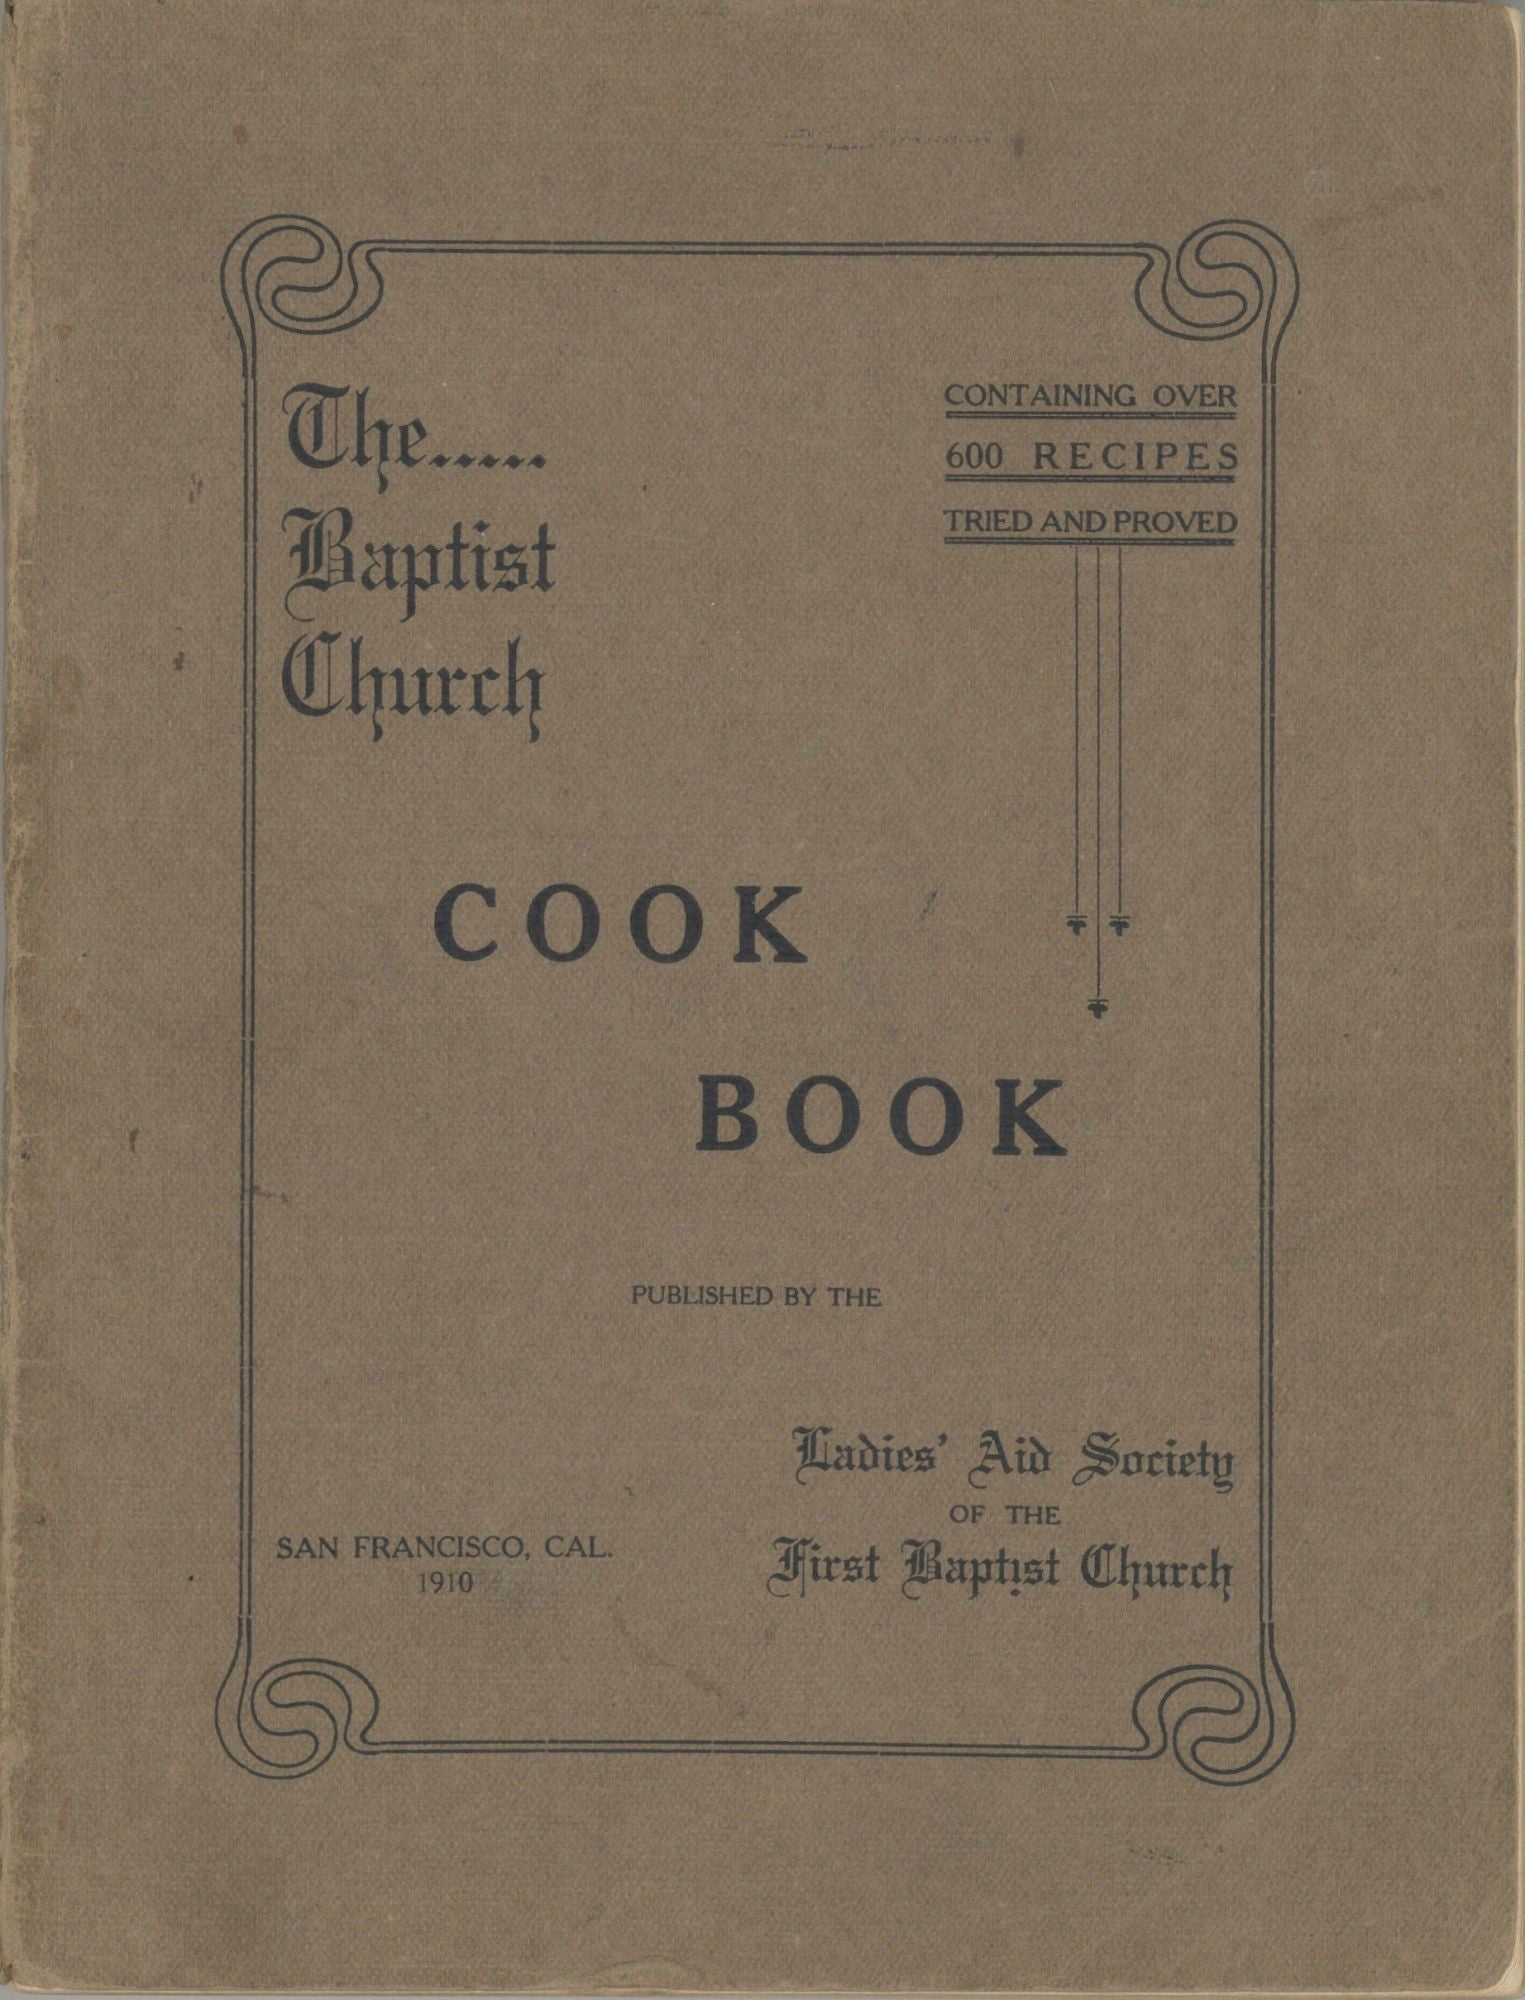 Item #4711 The Baptist Church Cook Book. Published by the Ladies' Aid Society of the First Baptist Church, San Francisco, Cal. First Baptist Church, Ladies’ Aid Society, San Francisco (Calif.